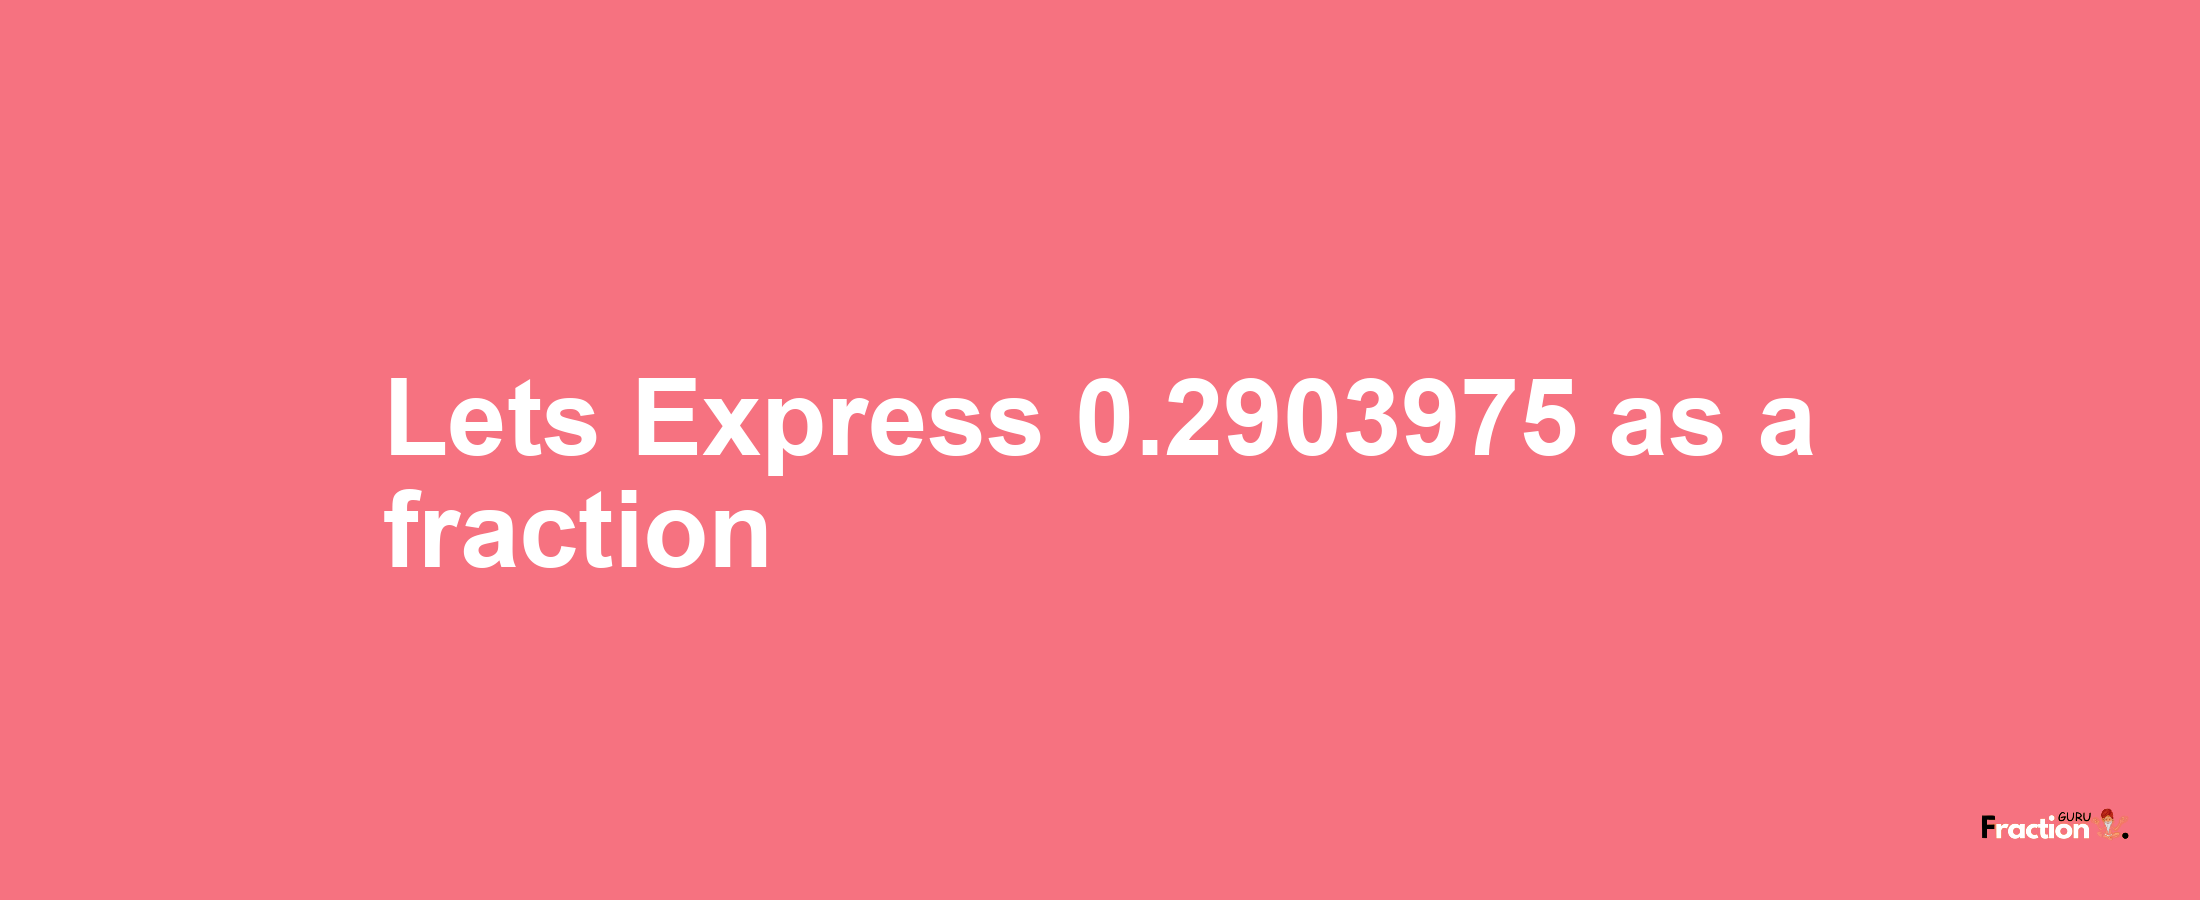 Lets Express 0.2903975 as afraction